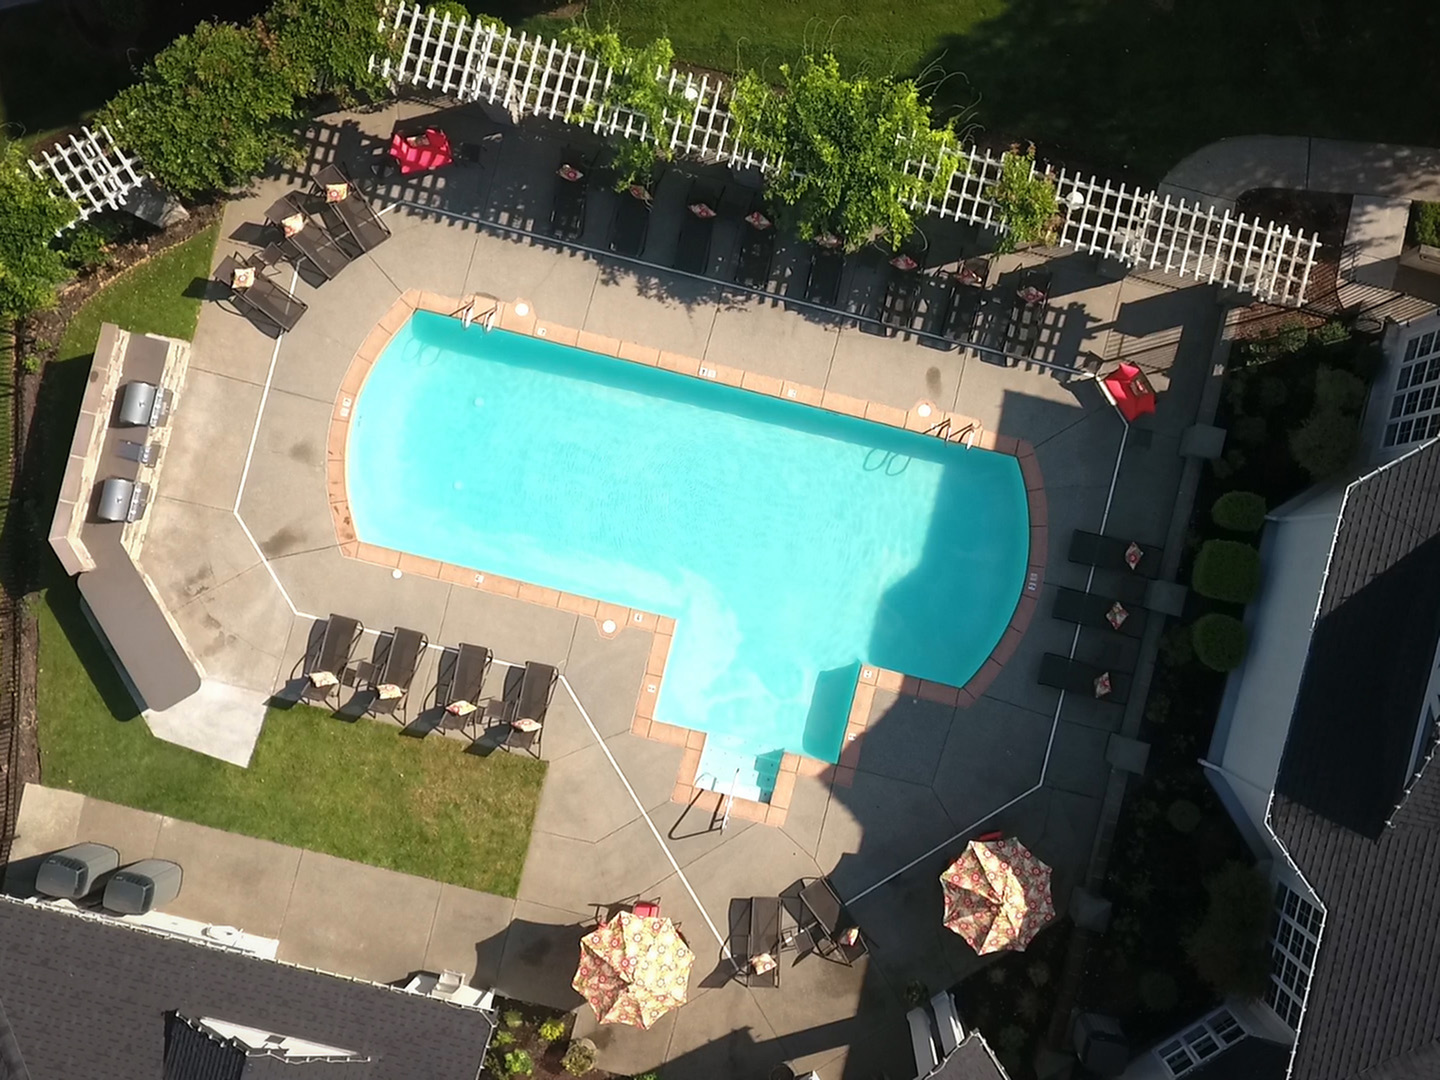 Apartment Swimming Pool | Puyallup WA Apartments For Rent | Willow Hill Apartments